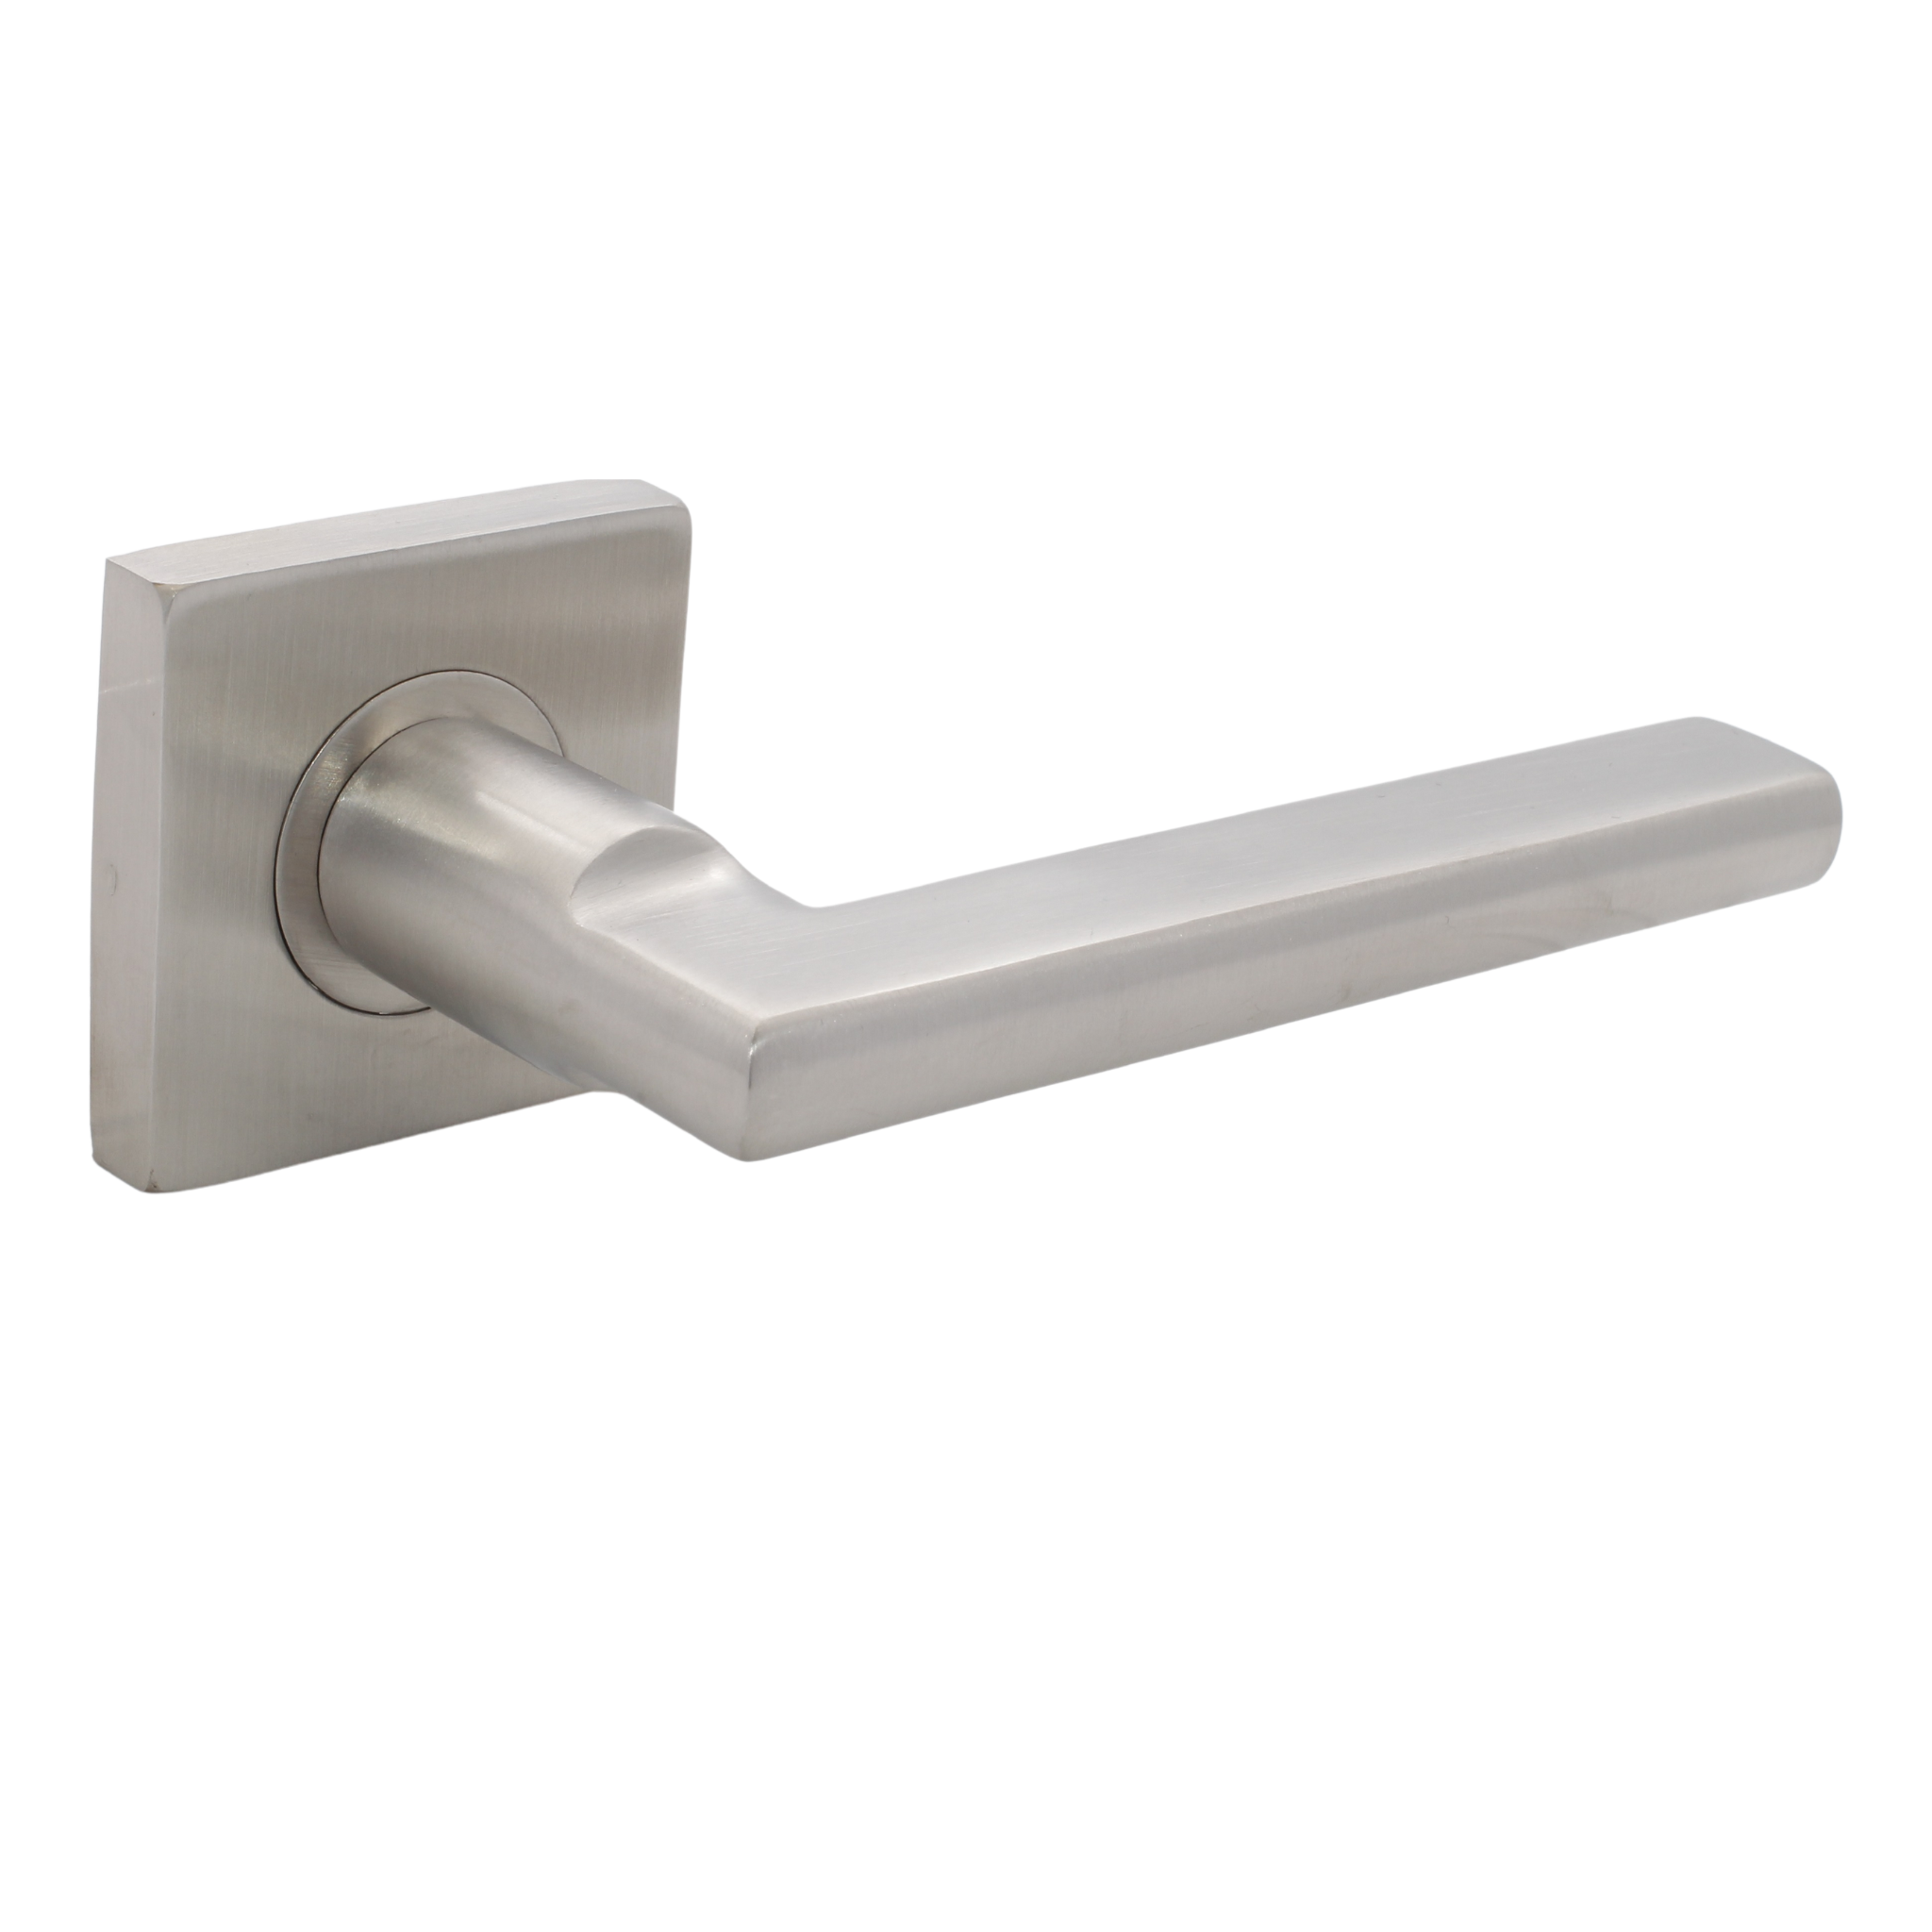 FS103.S._.TR, Lever Handles, Solid, On Square Rose, With Escutcheons, 134mm (l), Stainless Steel with Tarnish Resistant, CISA